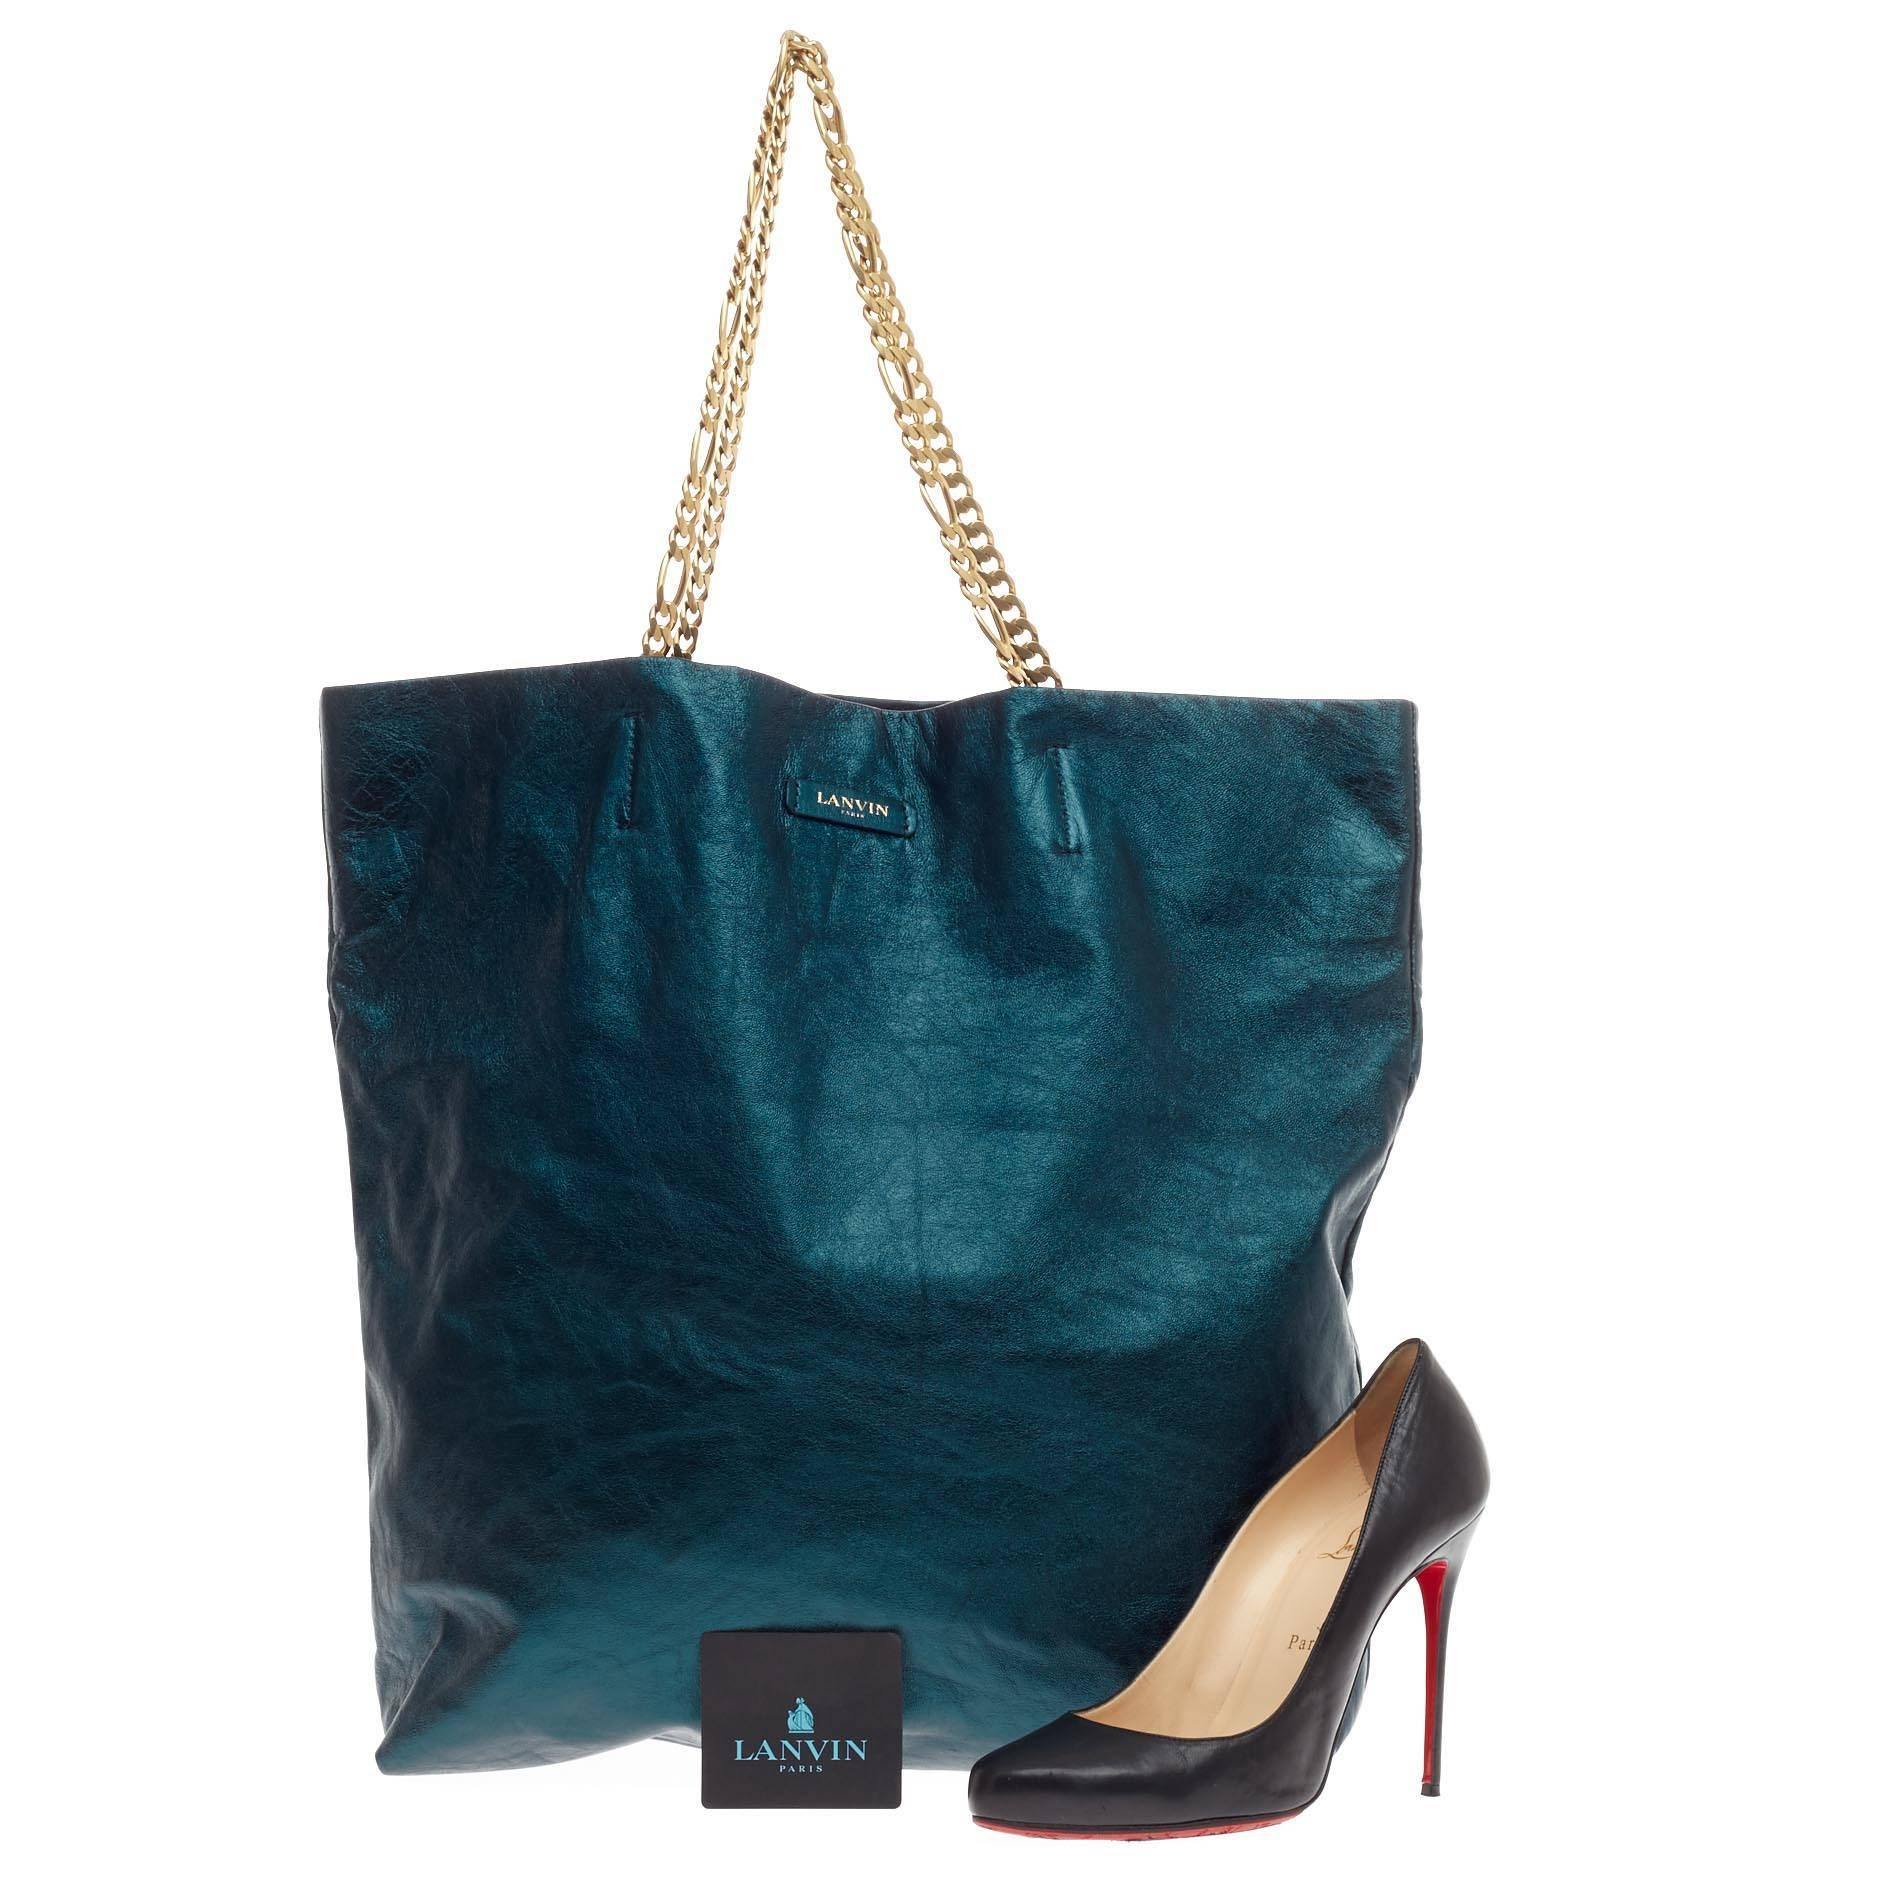 This authentic Lanvin Paper Bag Tote Metallic Lambskin Large presented in the brand's Spring/Summer 2014 Collection showcases a sophisticated, casual-luxe look made for the modern woman. Crafted from thin metallic blue lambskin crinkled leather with